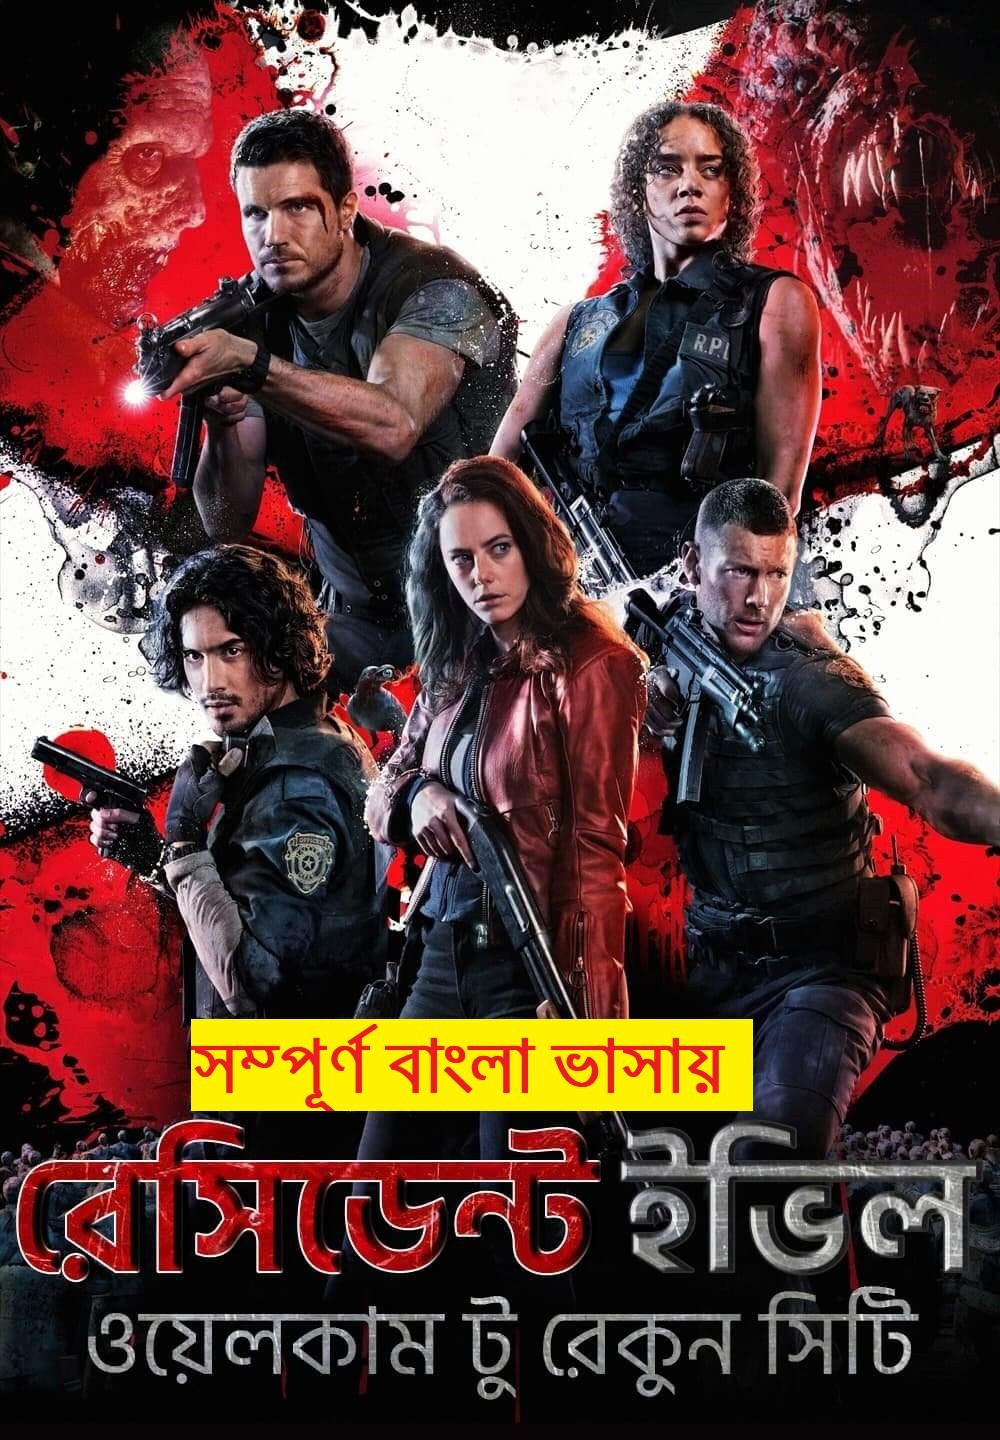 Resident Evil Welcome to Raccoon City 2022 Bengali Dubbed Movie 720p HDRip 900MB Download